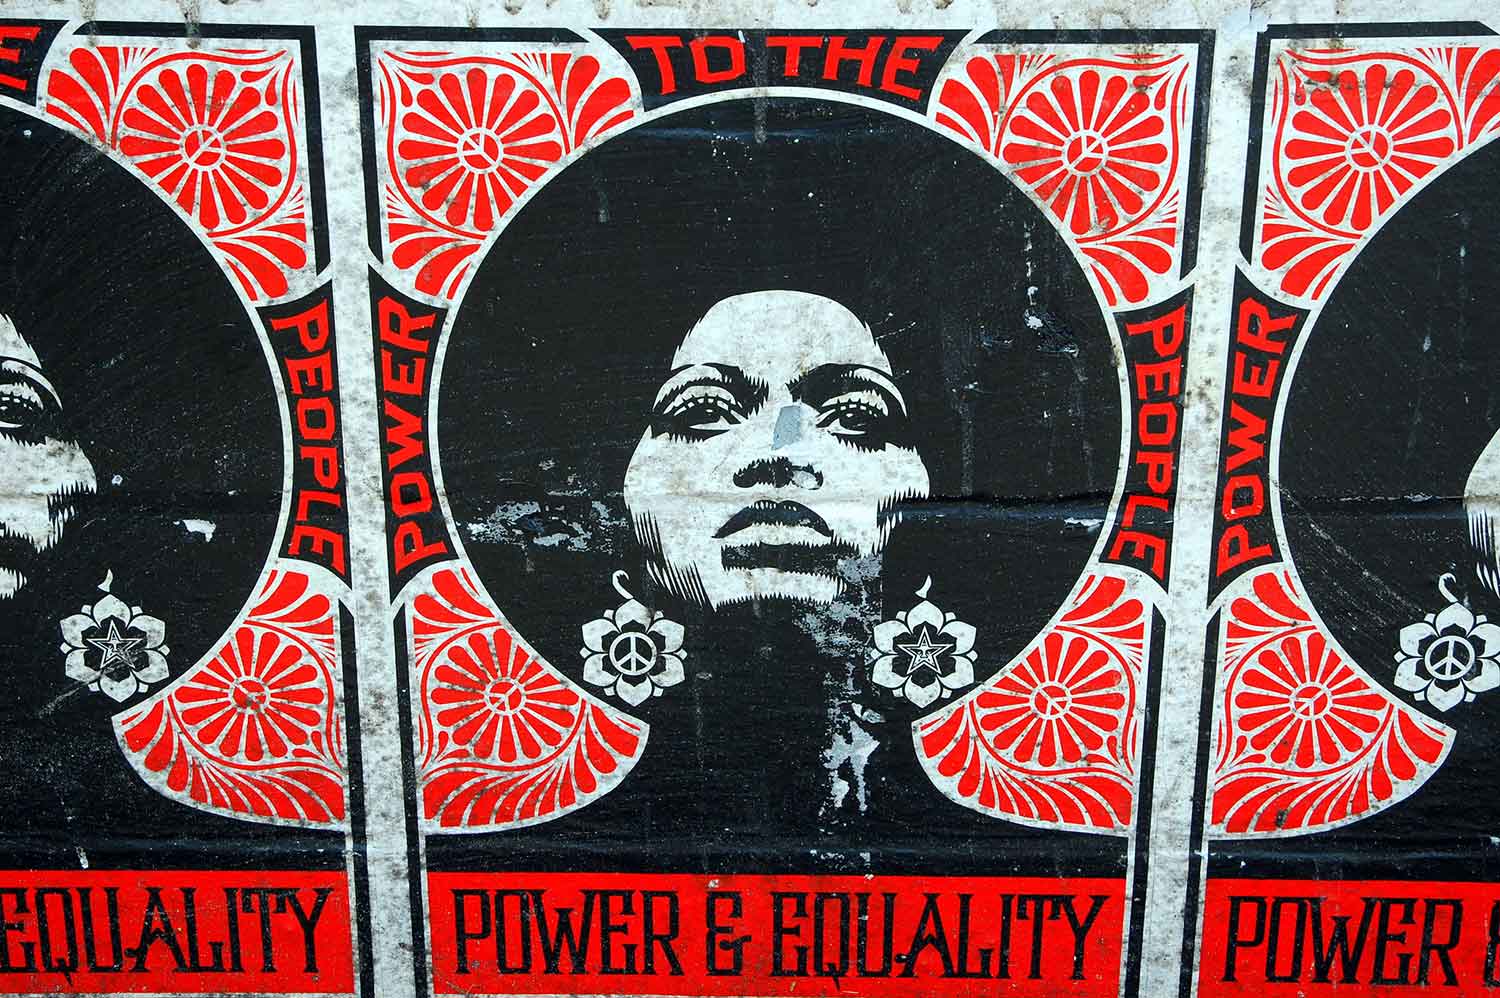 Poster depicting a woman wearing peace sign and star earrings. It also says 